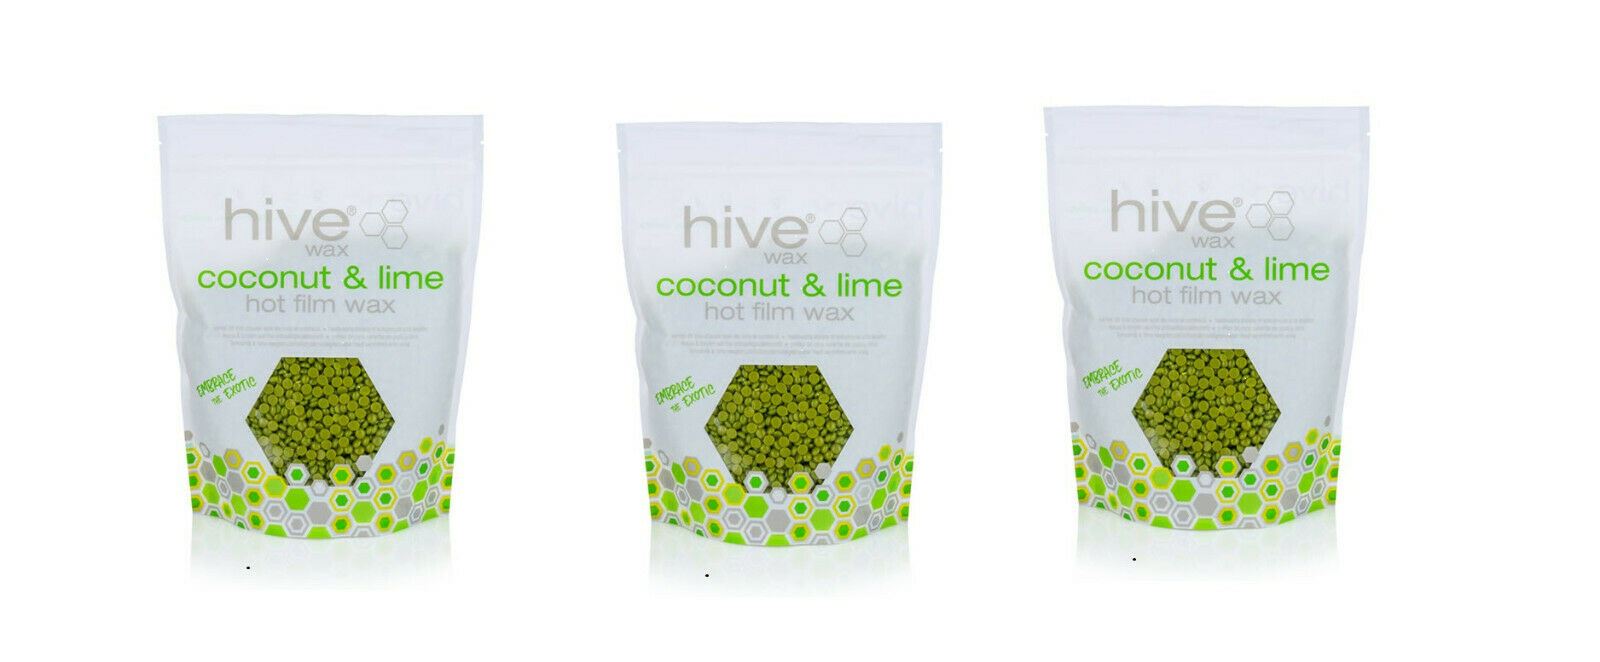 Hive Of Beauty Hot Film Wax Pellets - Coconut & Lime 700g x 3